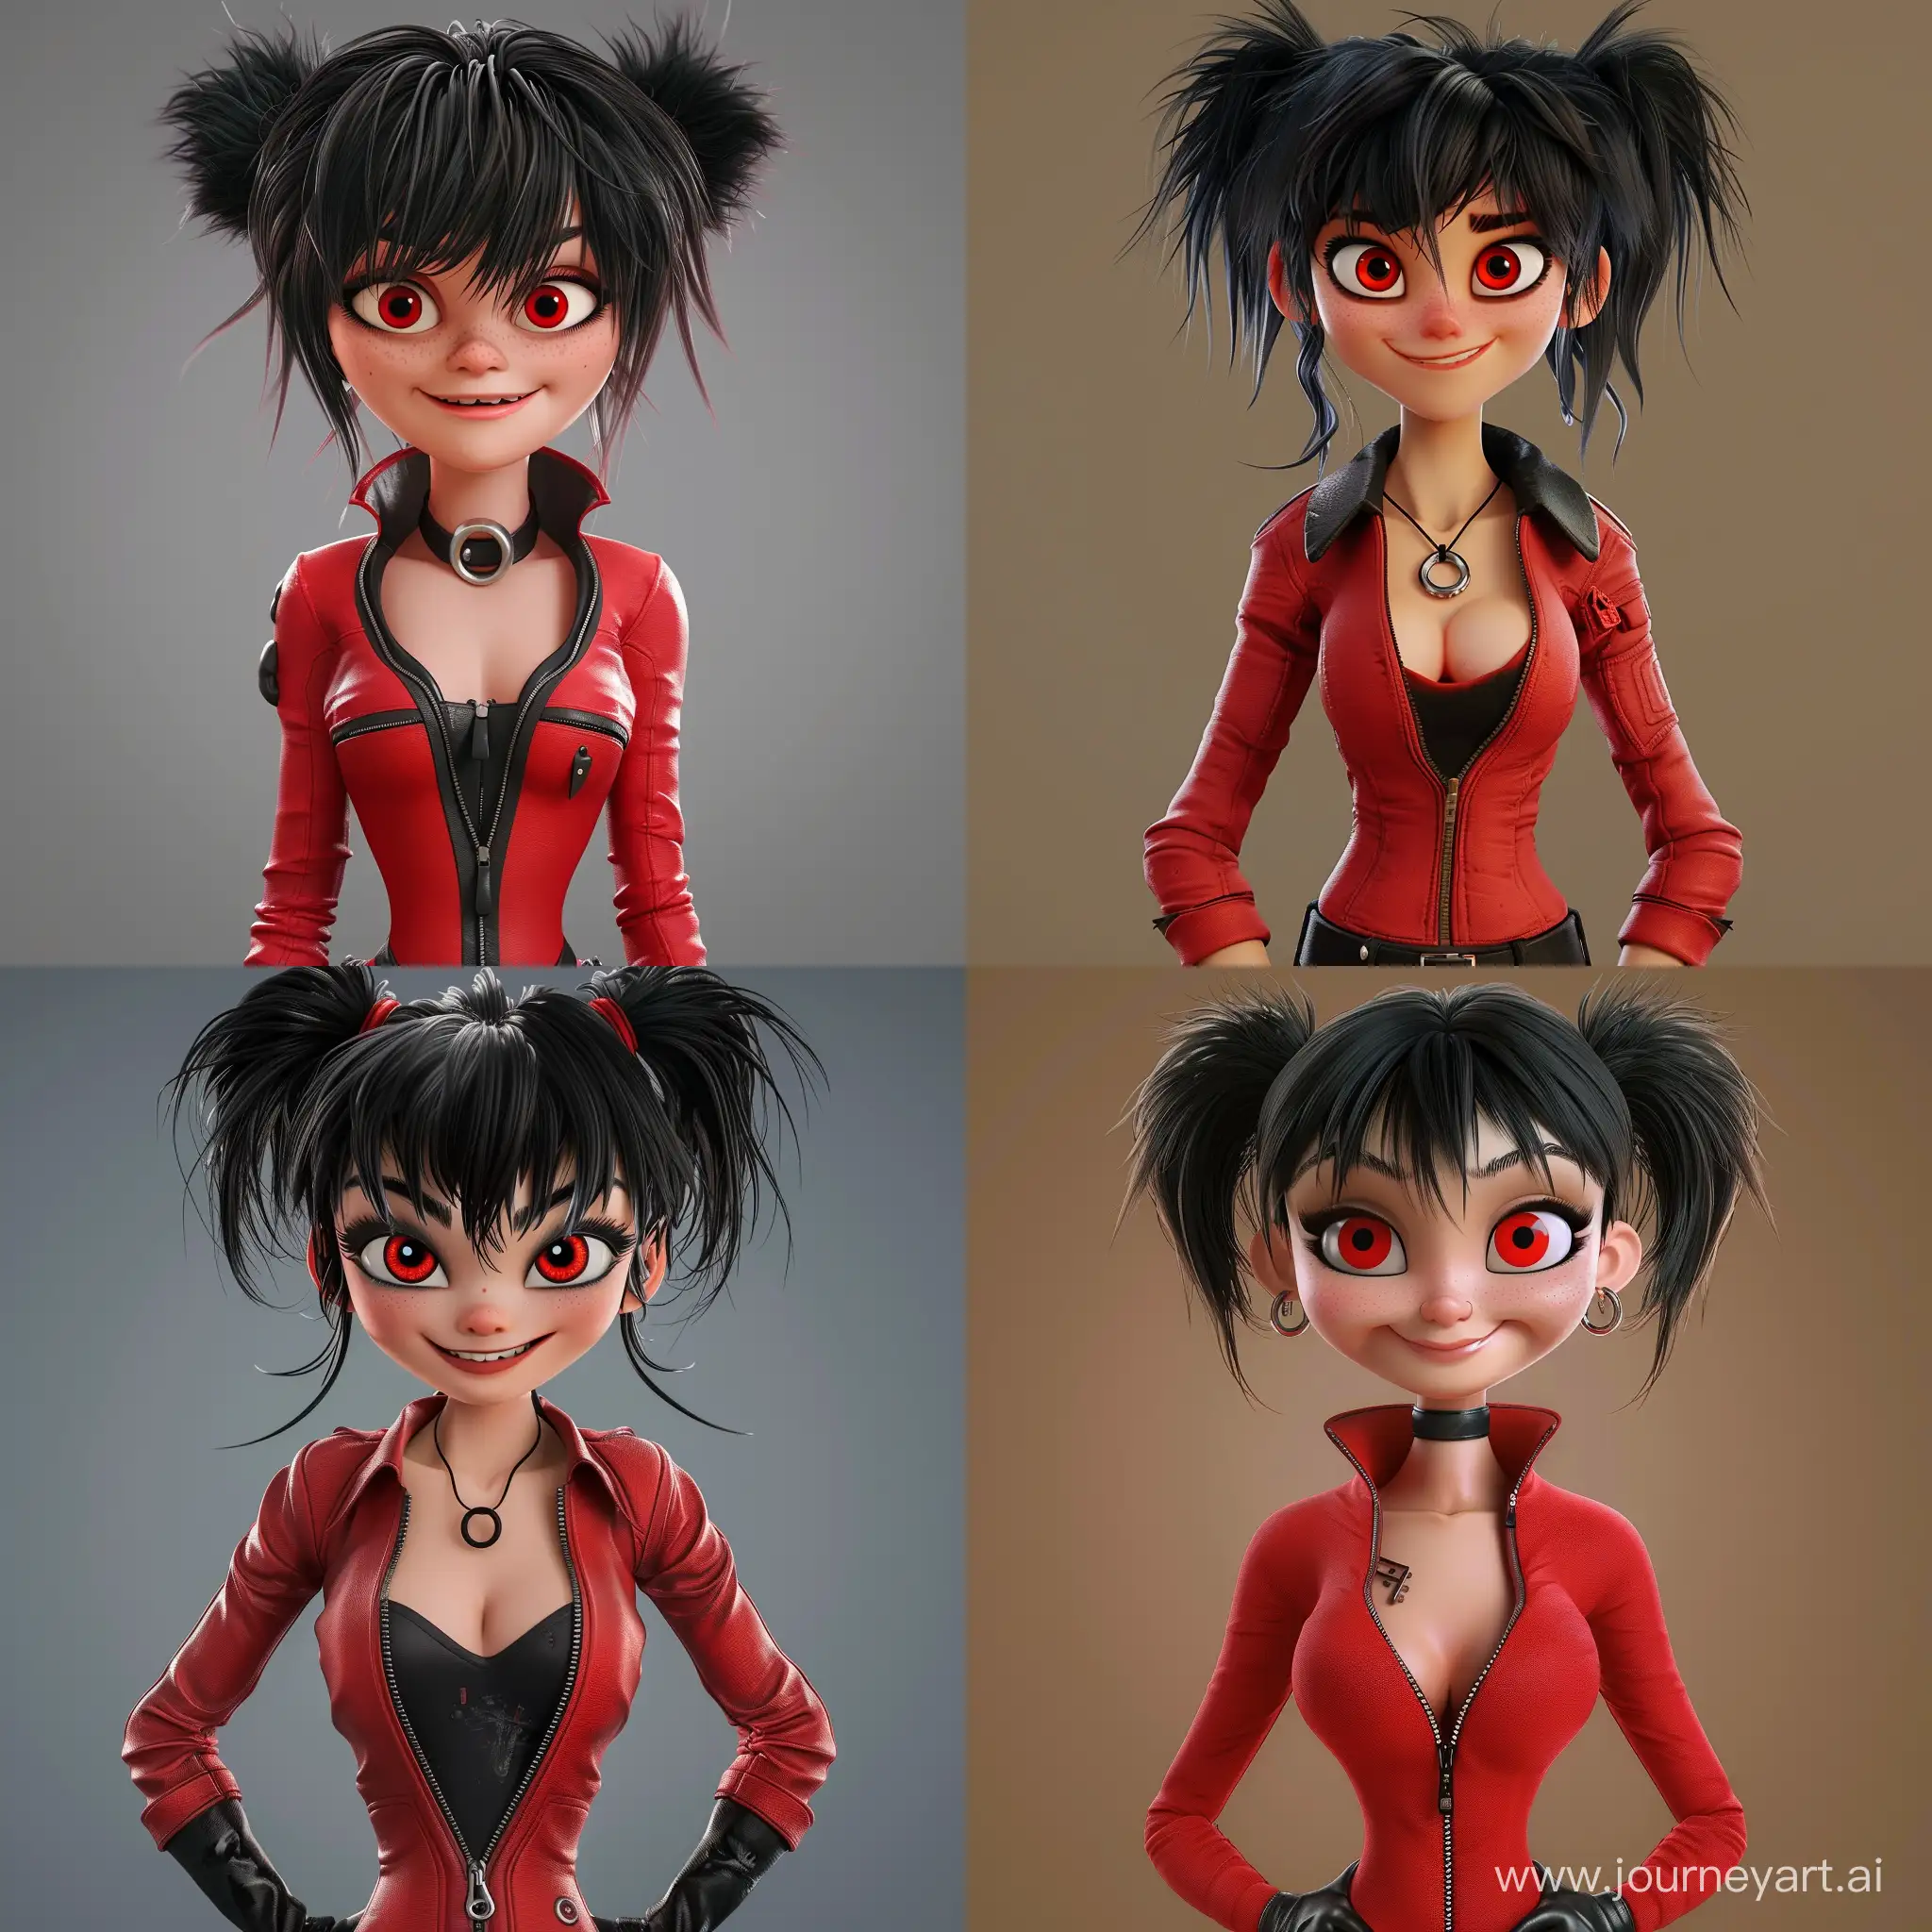 Children's Cartoon Style, Disney, Pixar, Nickelodeon, 3D, Unrealistic Proportions, Child Safe Design, Girl, Cool, Brutal, Badass, Red Eyes, Black Shaggy Hair, Low Ponytail, Tight Red Zip Up Shirt, Large Fastener Ring, Small Cleavage, Large Stand Up Collar, Black Leather Jacket, Black Leather Gloves, Black Leather Pants, Red Boots, Cool Pose, Smiling, Close Up